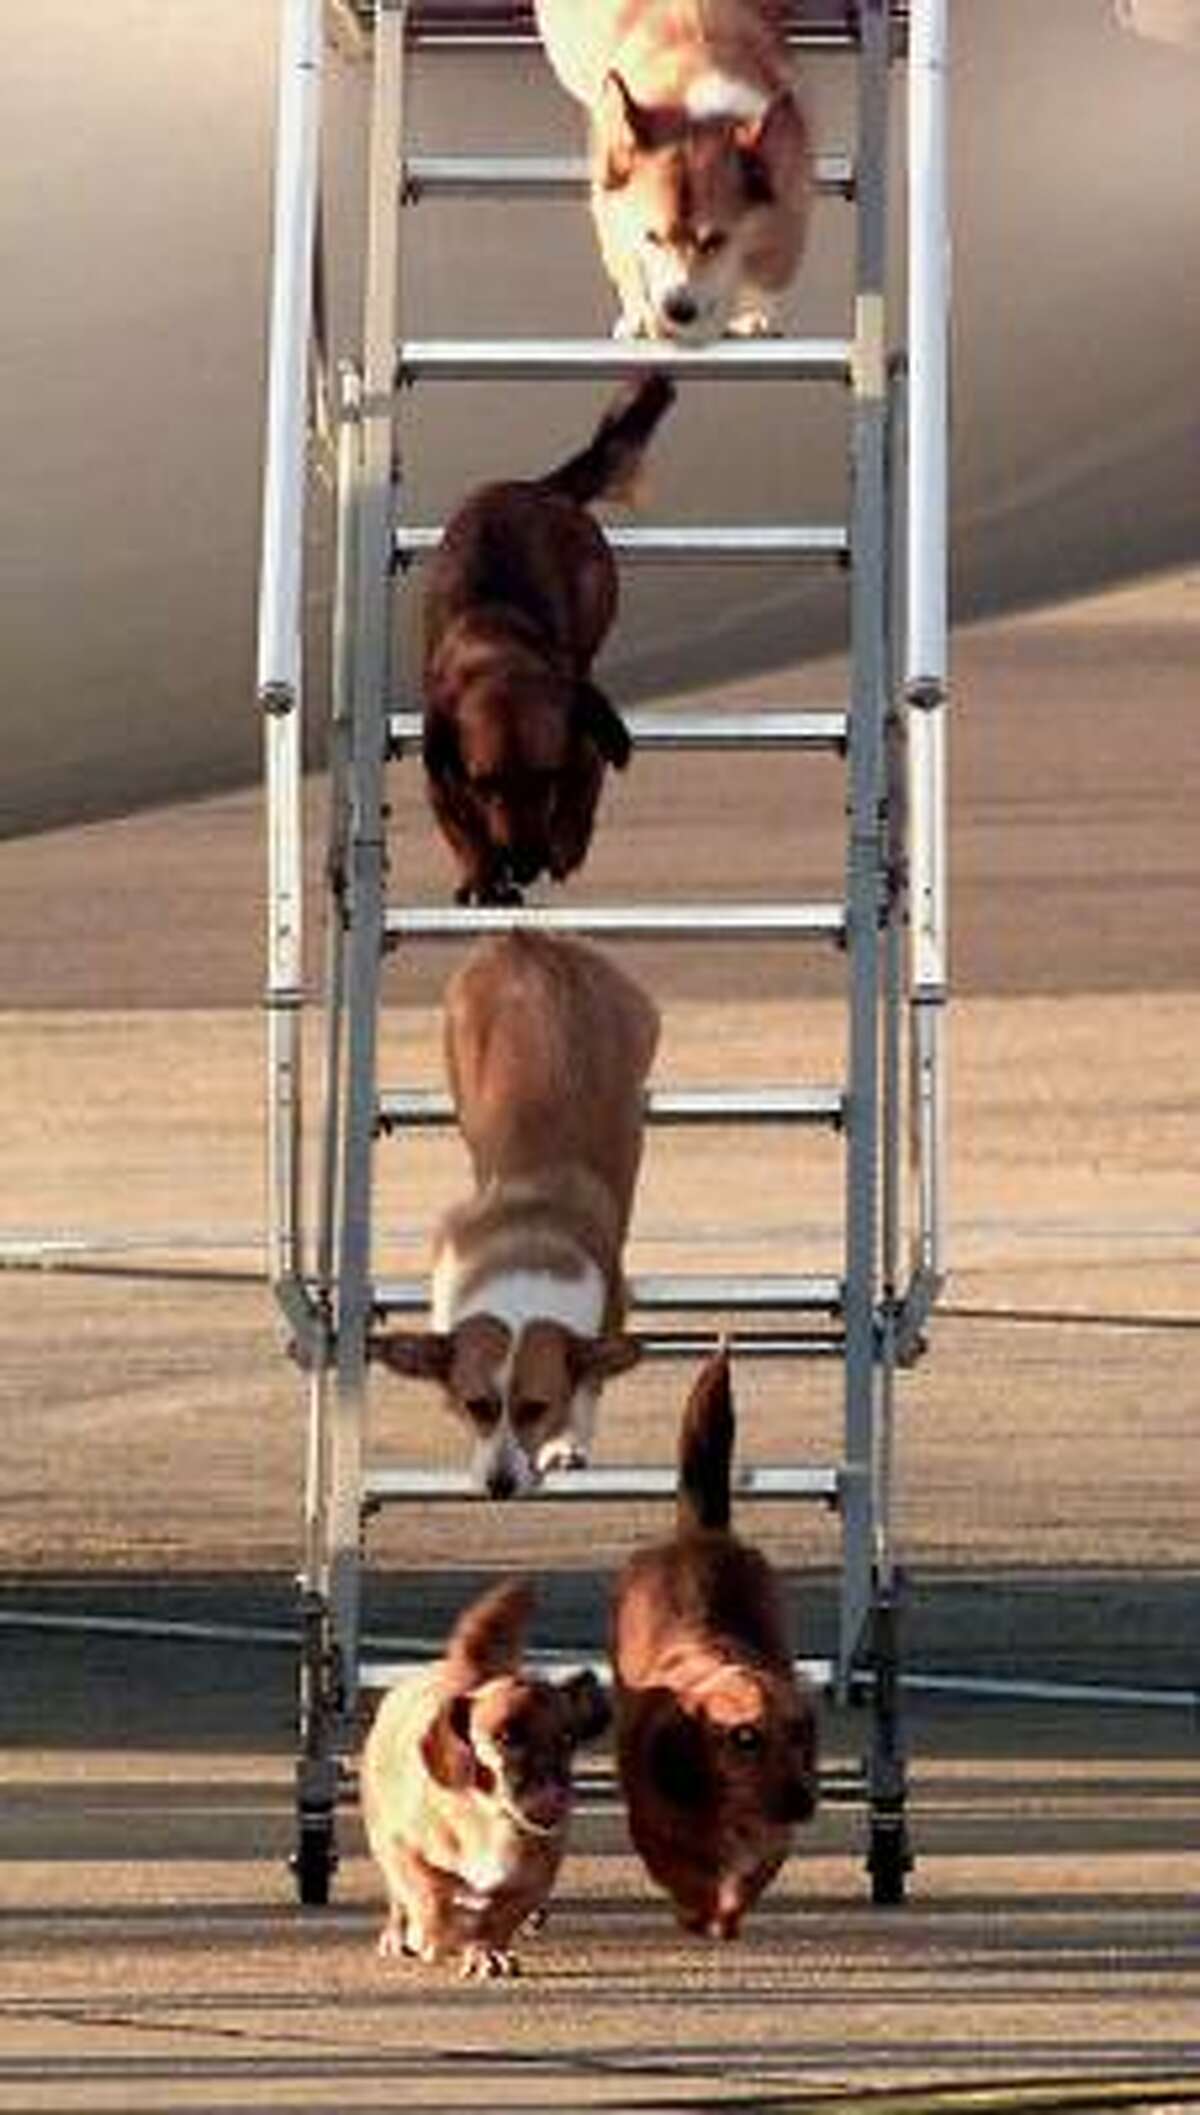 The Queen's dogs leave an aircraft following a flight from Aberdeen, Scotland, to Heathrow Airport, London. Queen Elizabeth is a keen dog lover, particularly of Corgis, and travels with them whenever she can.